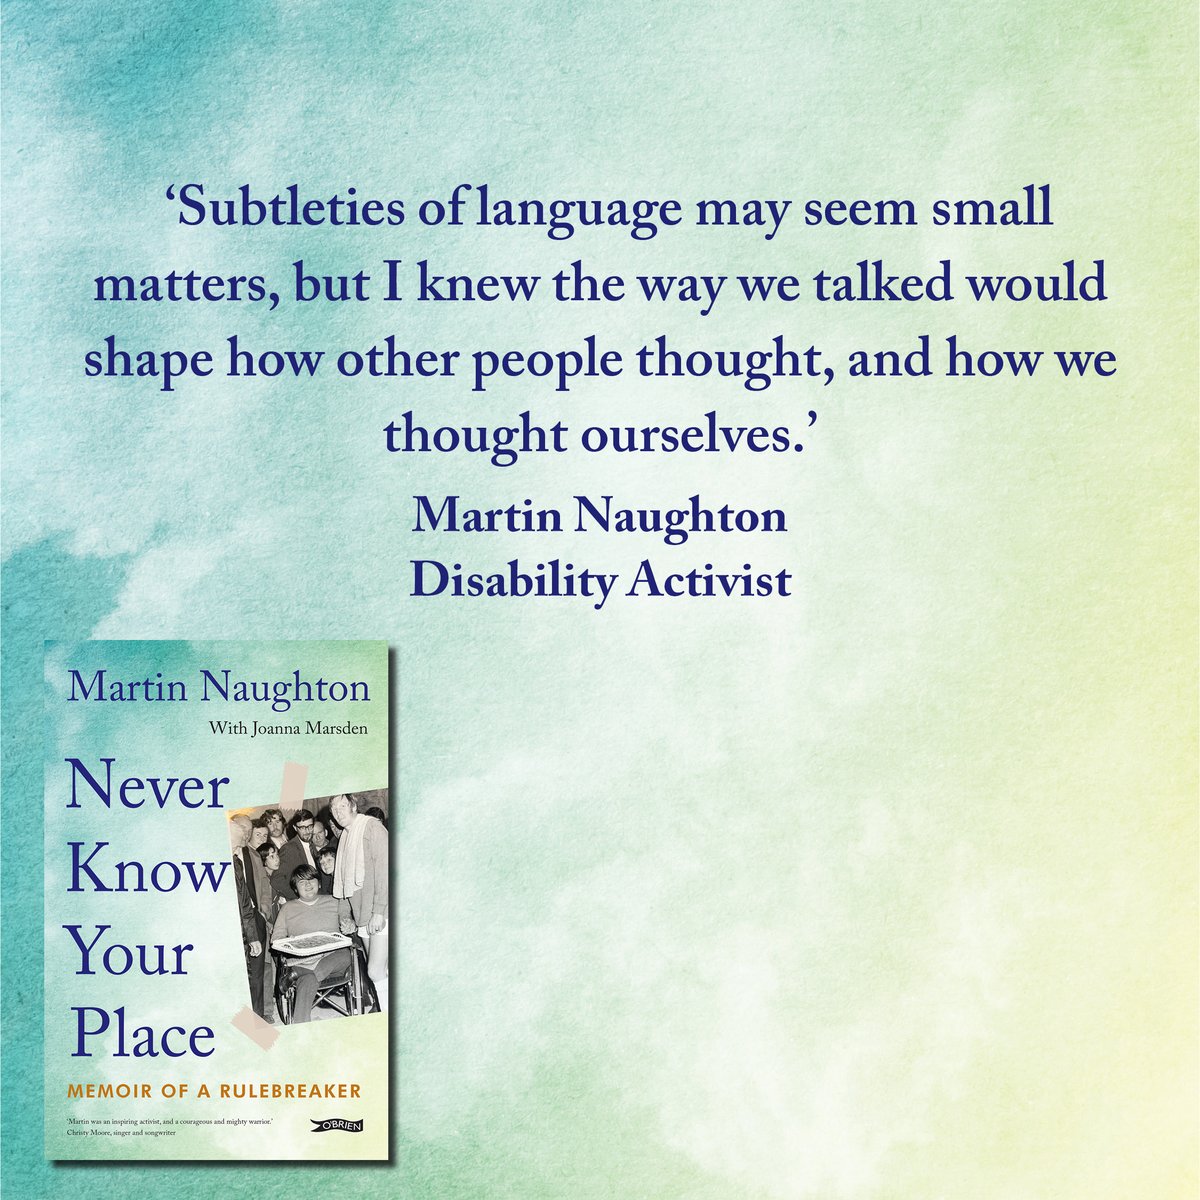 #NeverKnowYourPlace - Memoir of a Rulebreaker by Martin Naughton with @JoannaRMarsden. 

The story of a young man who led the fight for freedom for disabled people.  

In Bookshops 11th March.

@DisabilityFed @IrishWheelchair @ILMIreland